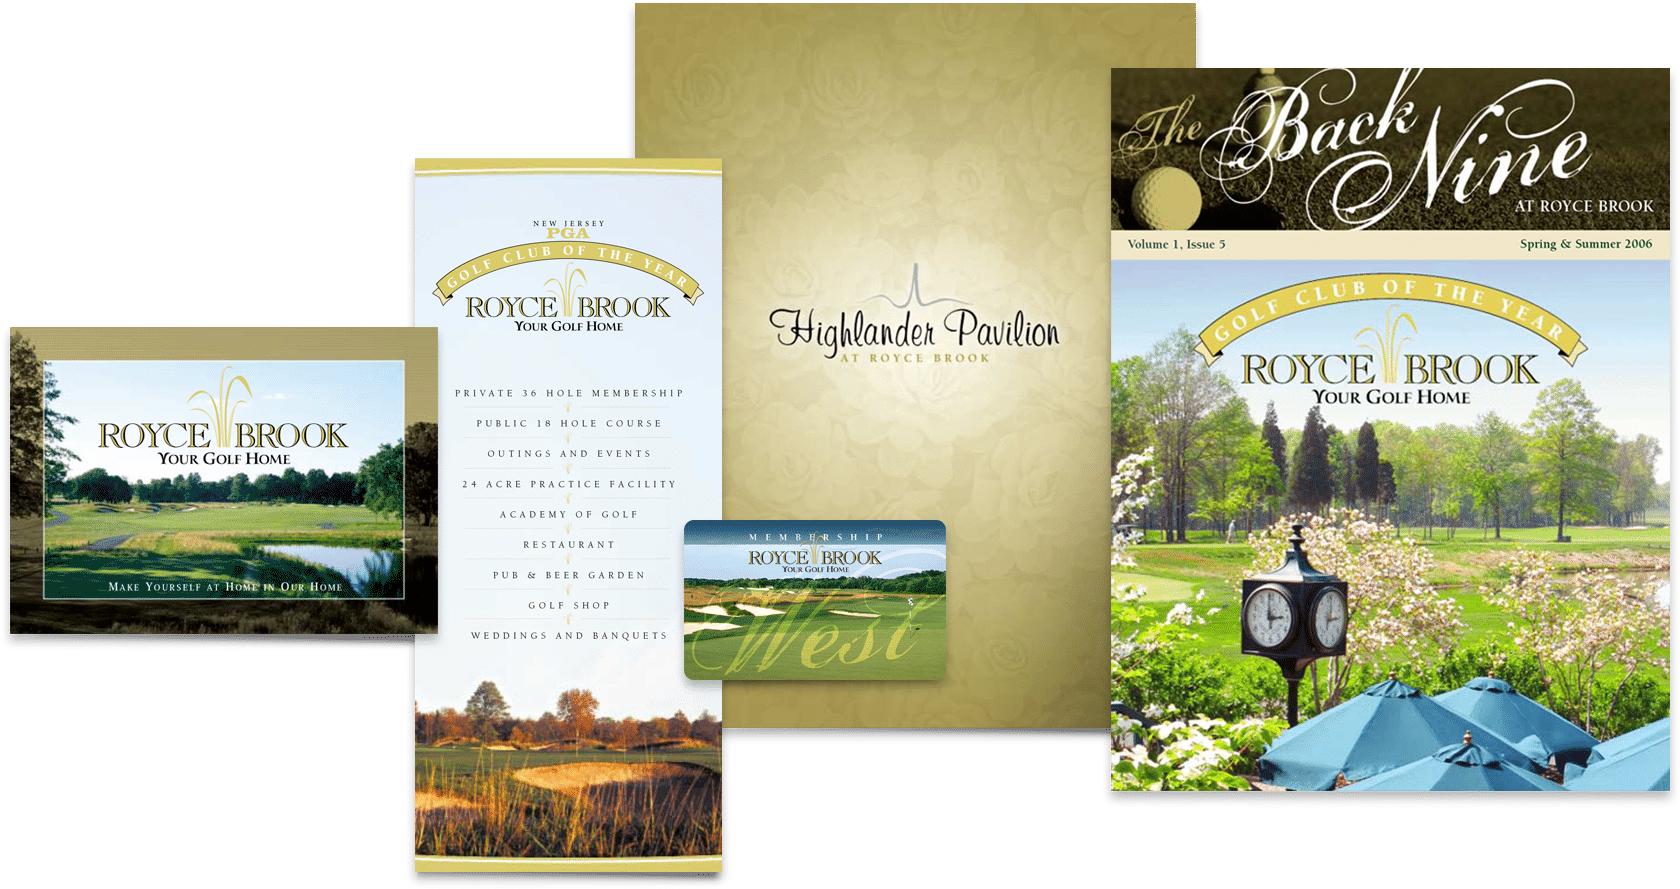 Collateral design examples by a NJ branding specialist